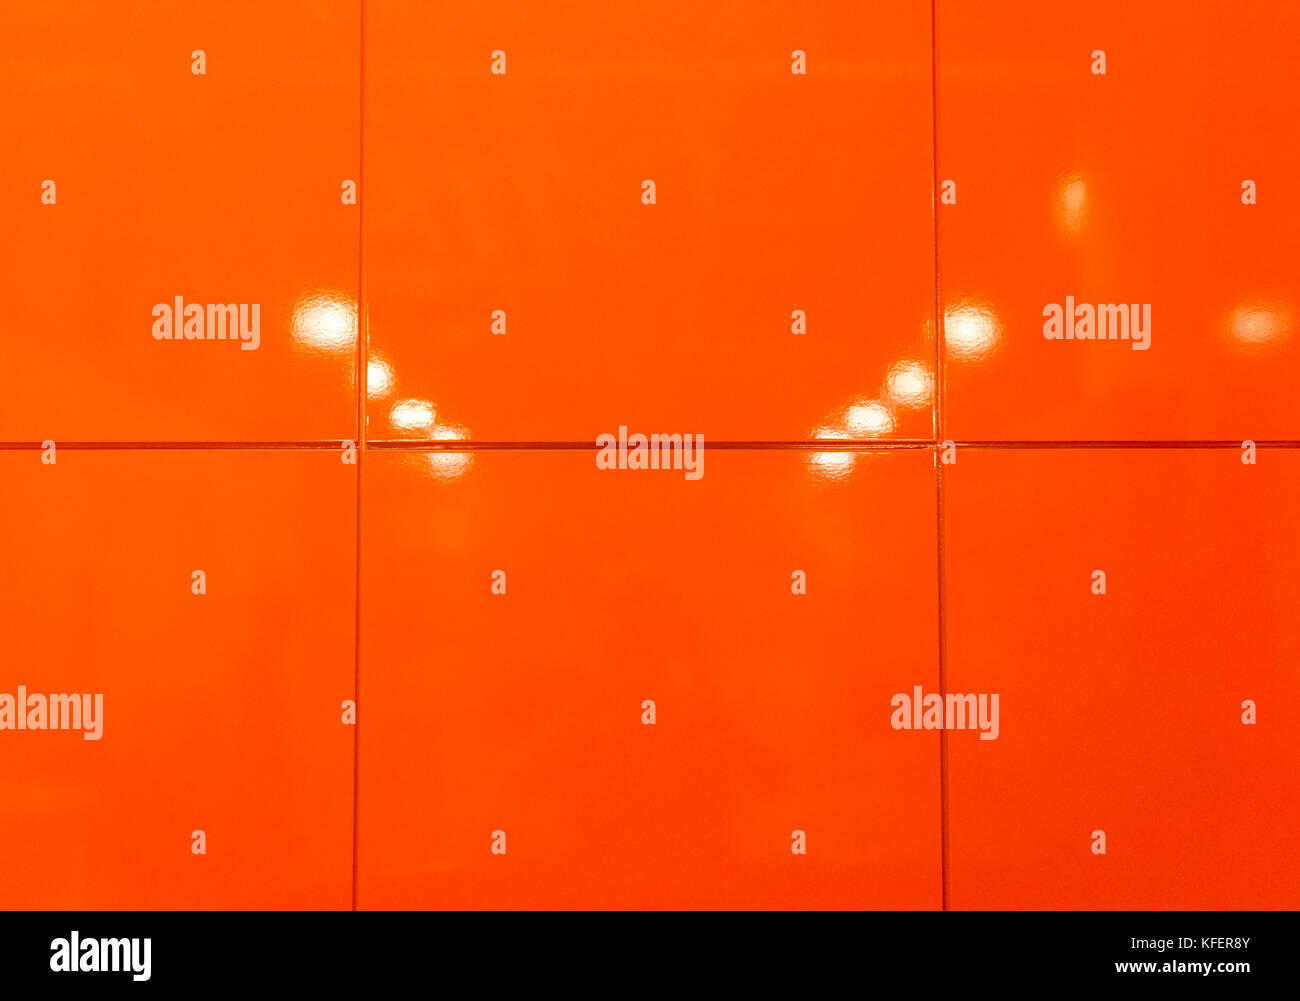 orange glossy noble urban mirroring flagging, tile texture with lights .backgrounds and texture. background textures surface. background wallpaper Stock Photo